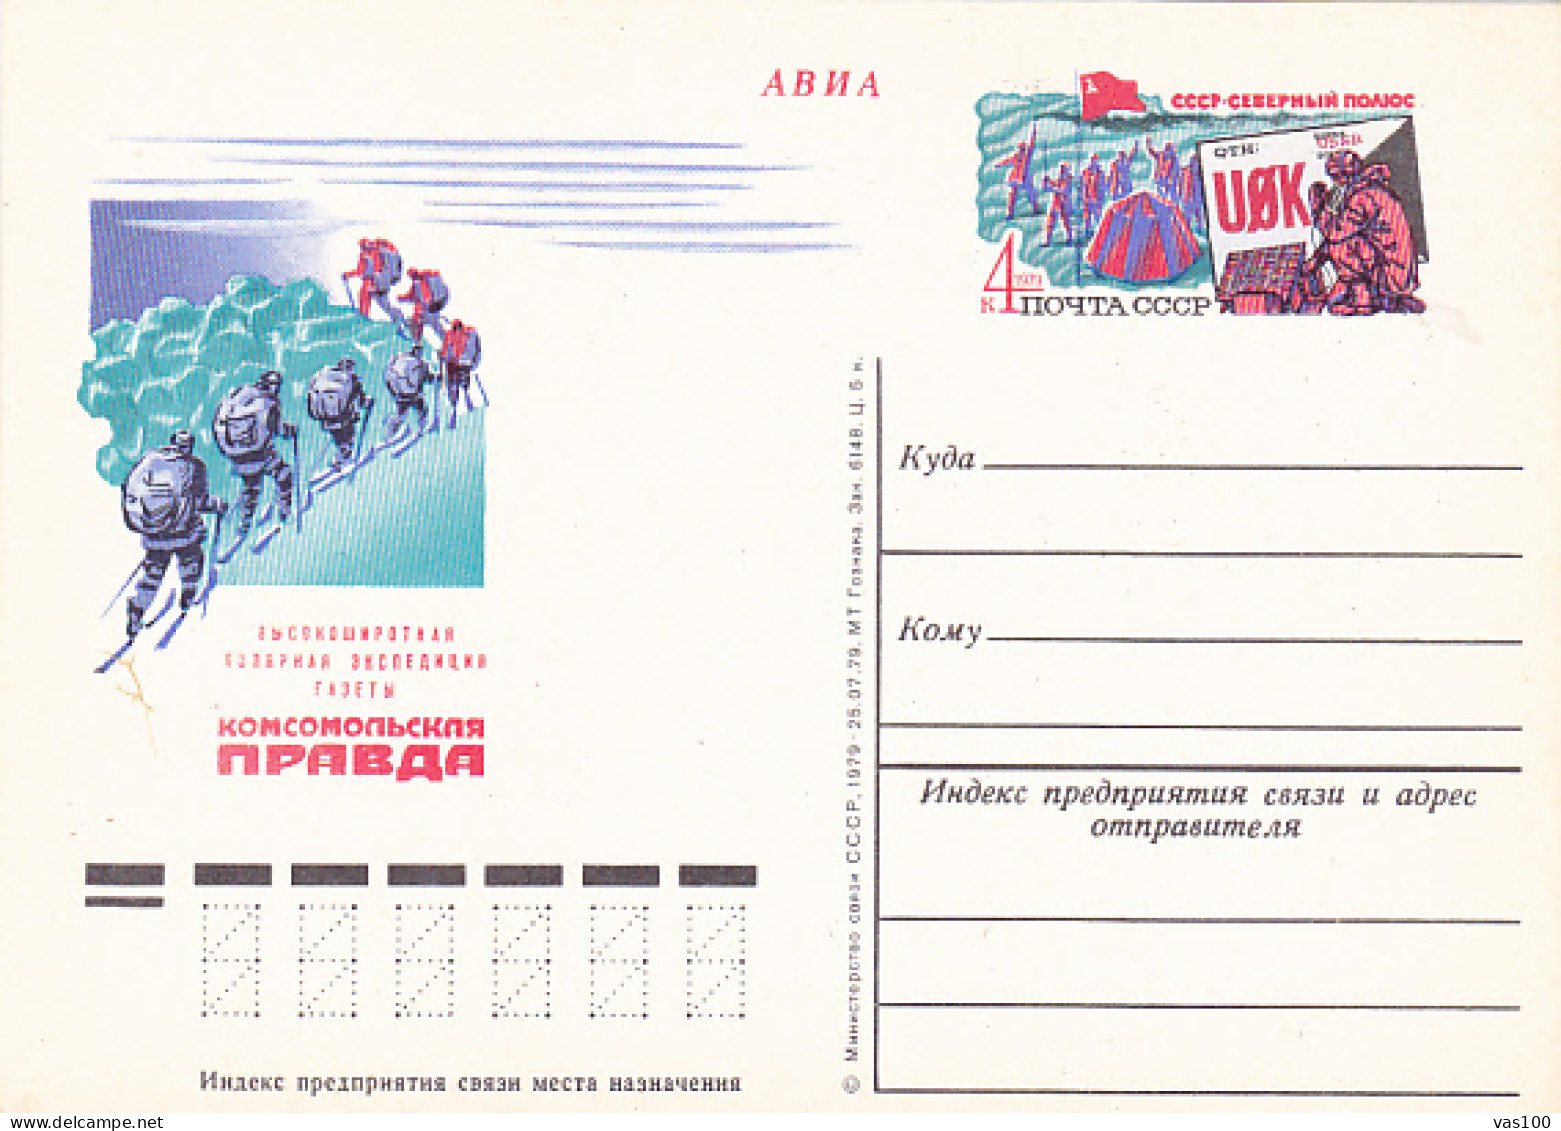 NORTH POLE, PRAVDA NEWSPAPER RUSSIAN ARCTIC EXPEDITION, PC STATIONERY, ENTIER POSTAL, 1979, RUSSIA - Arctic Expeditions